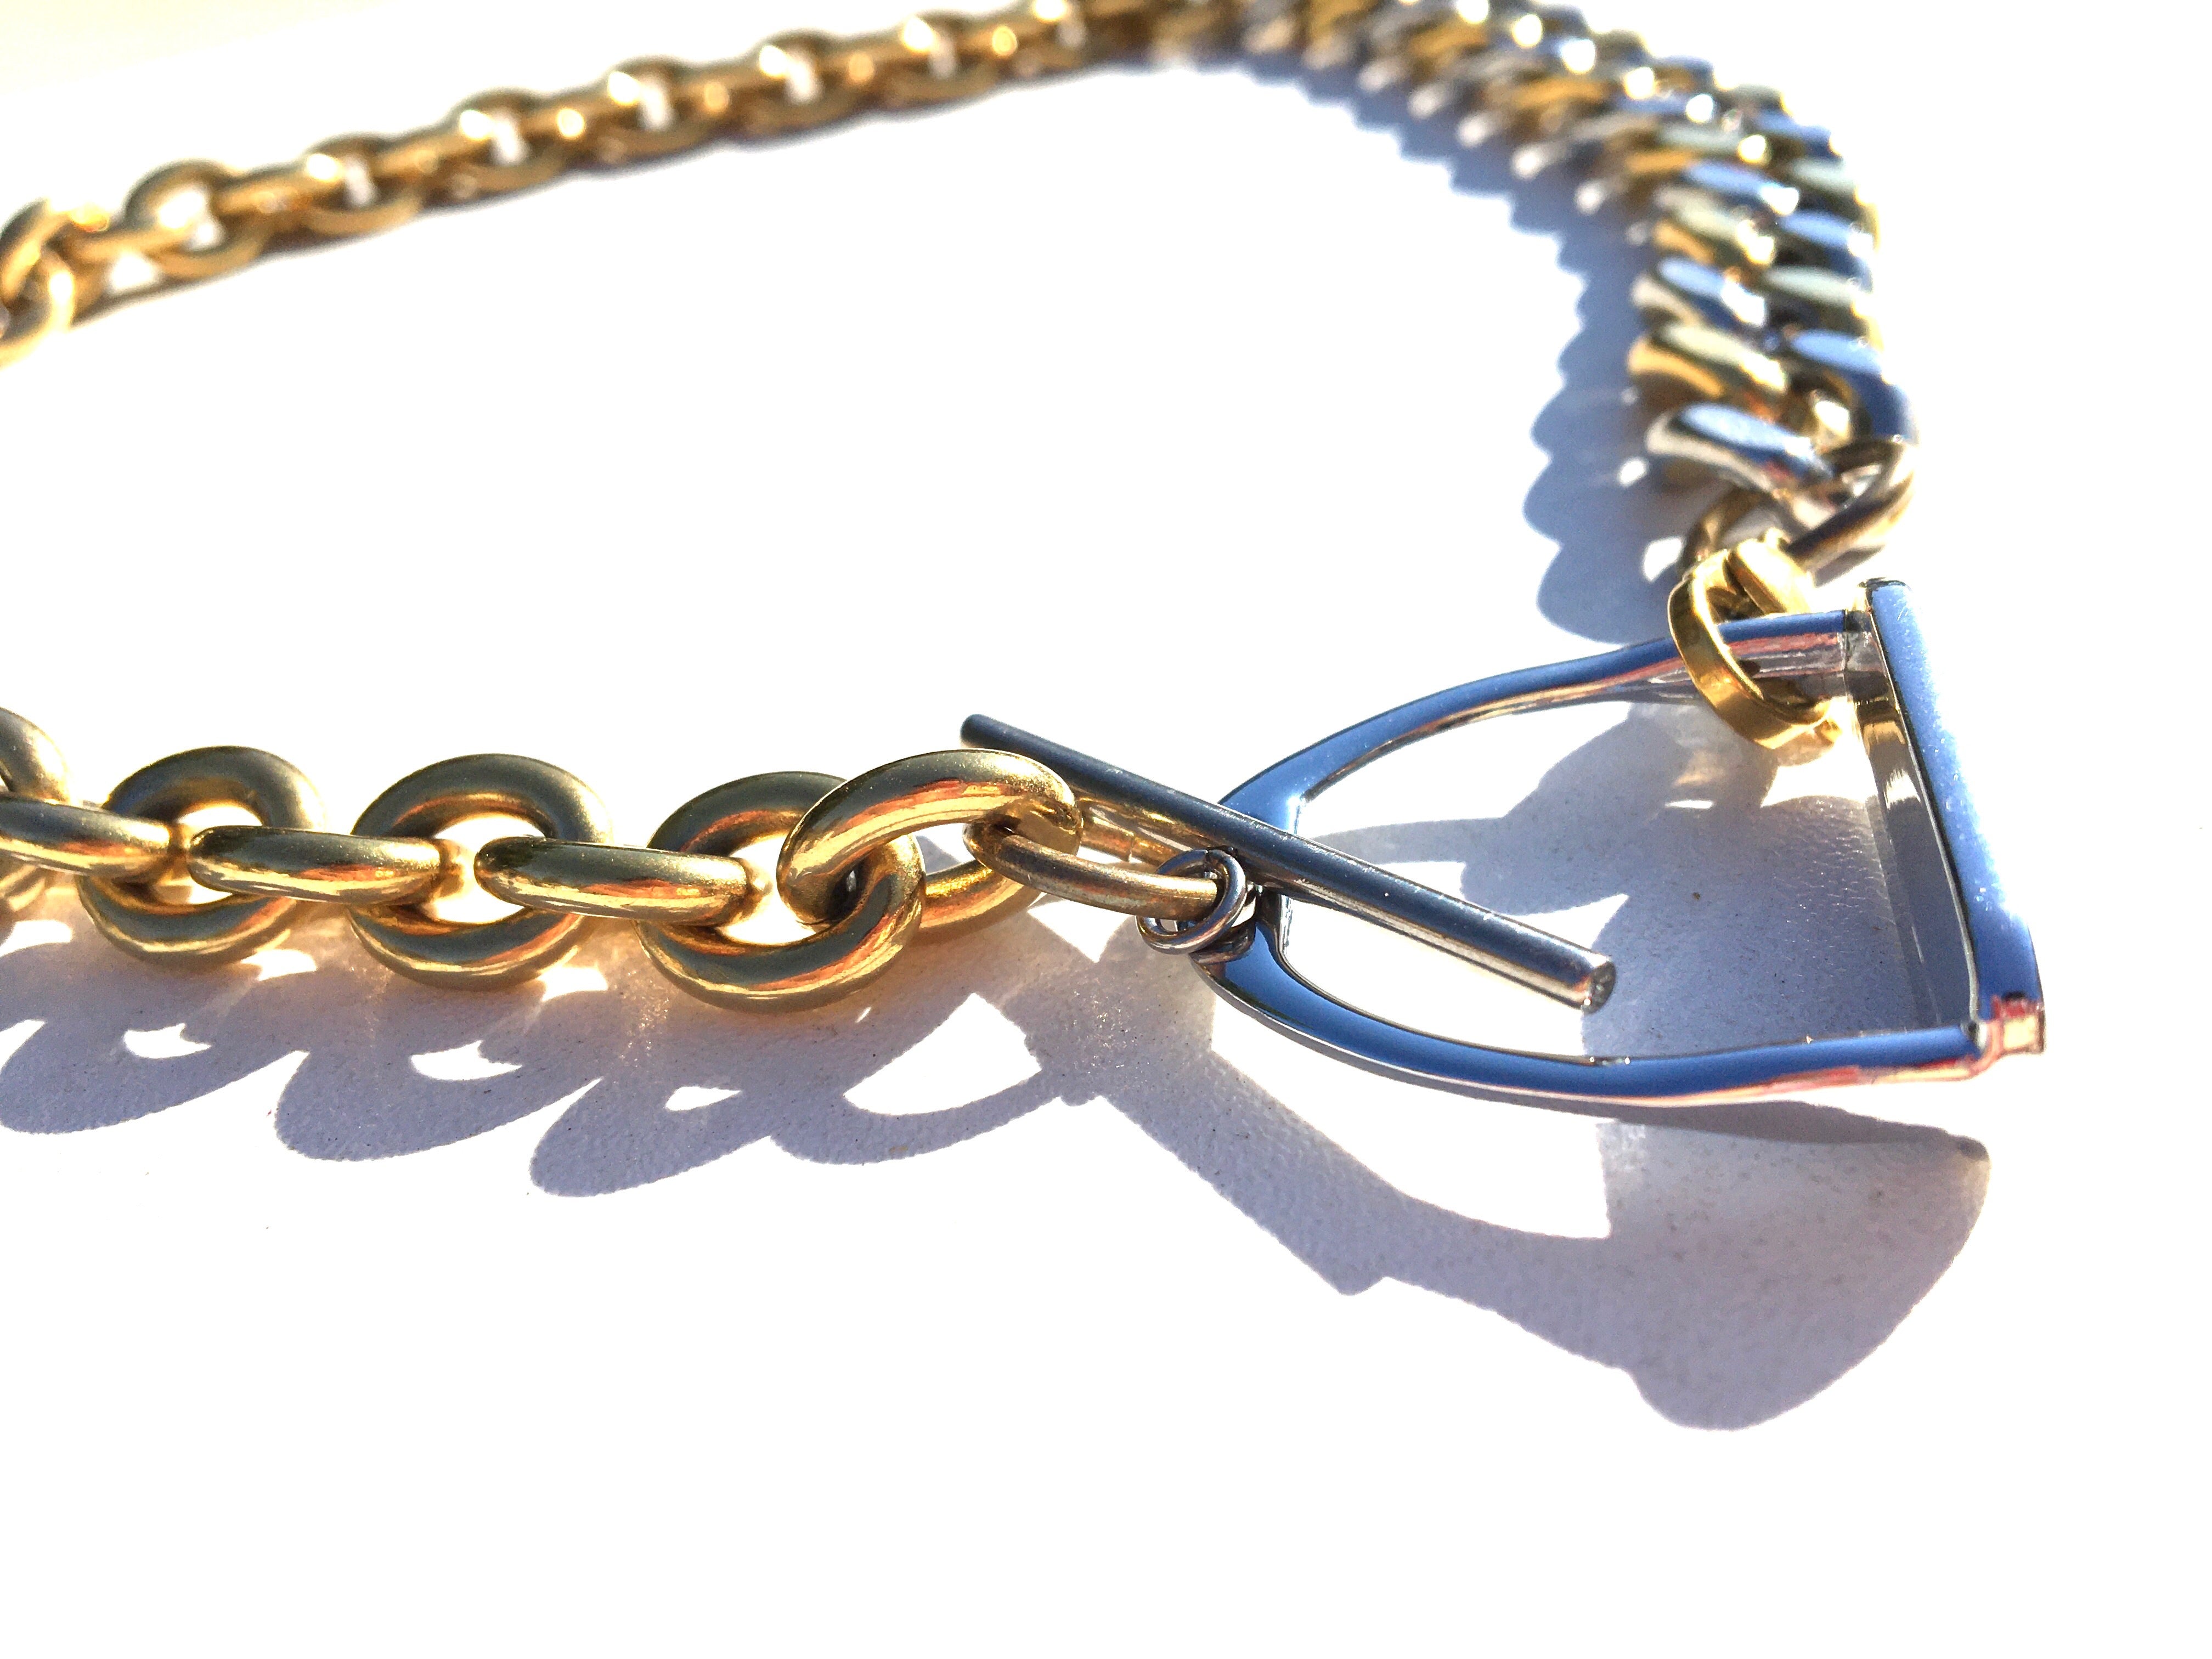 ARKLE NECKLACE | GOLD | Equestrian Jewelry | Equestrian Gifts - AtelierCG™